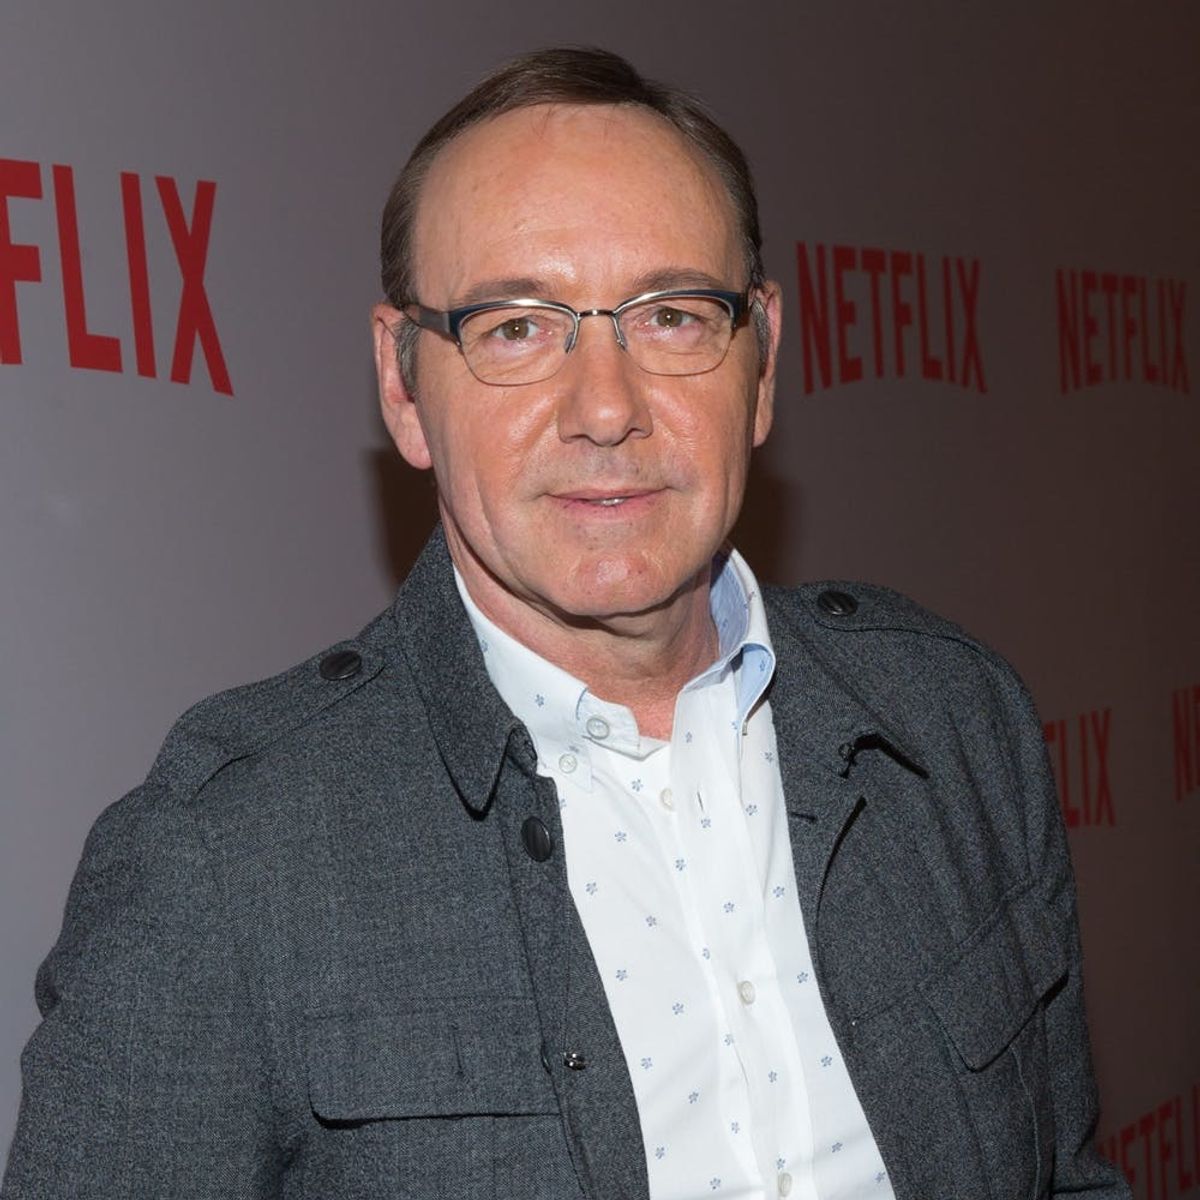 Kevin Spacey Will Be Edited Out of Ridley Scott’s Already-Finished New Movie